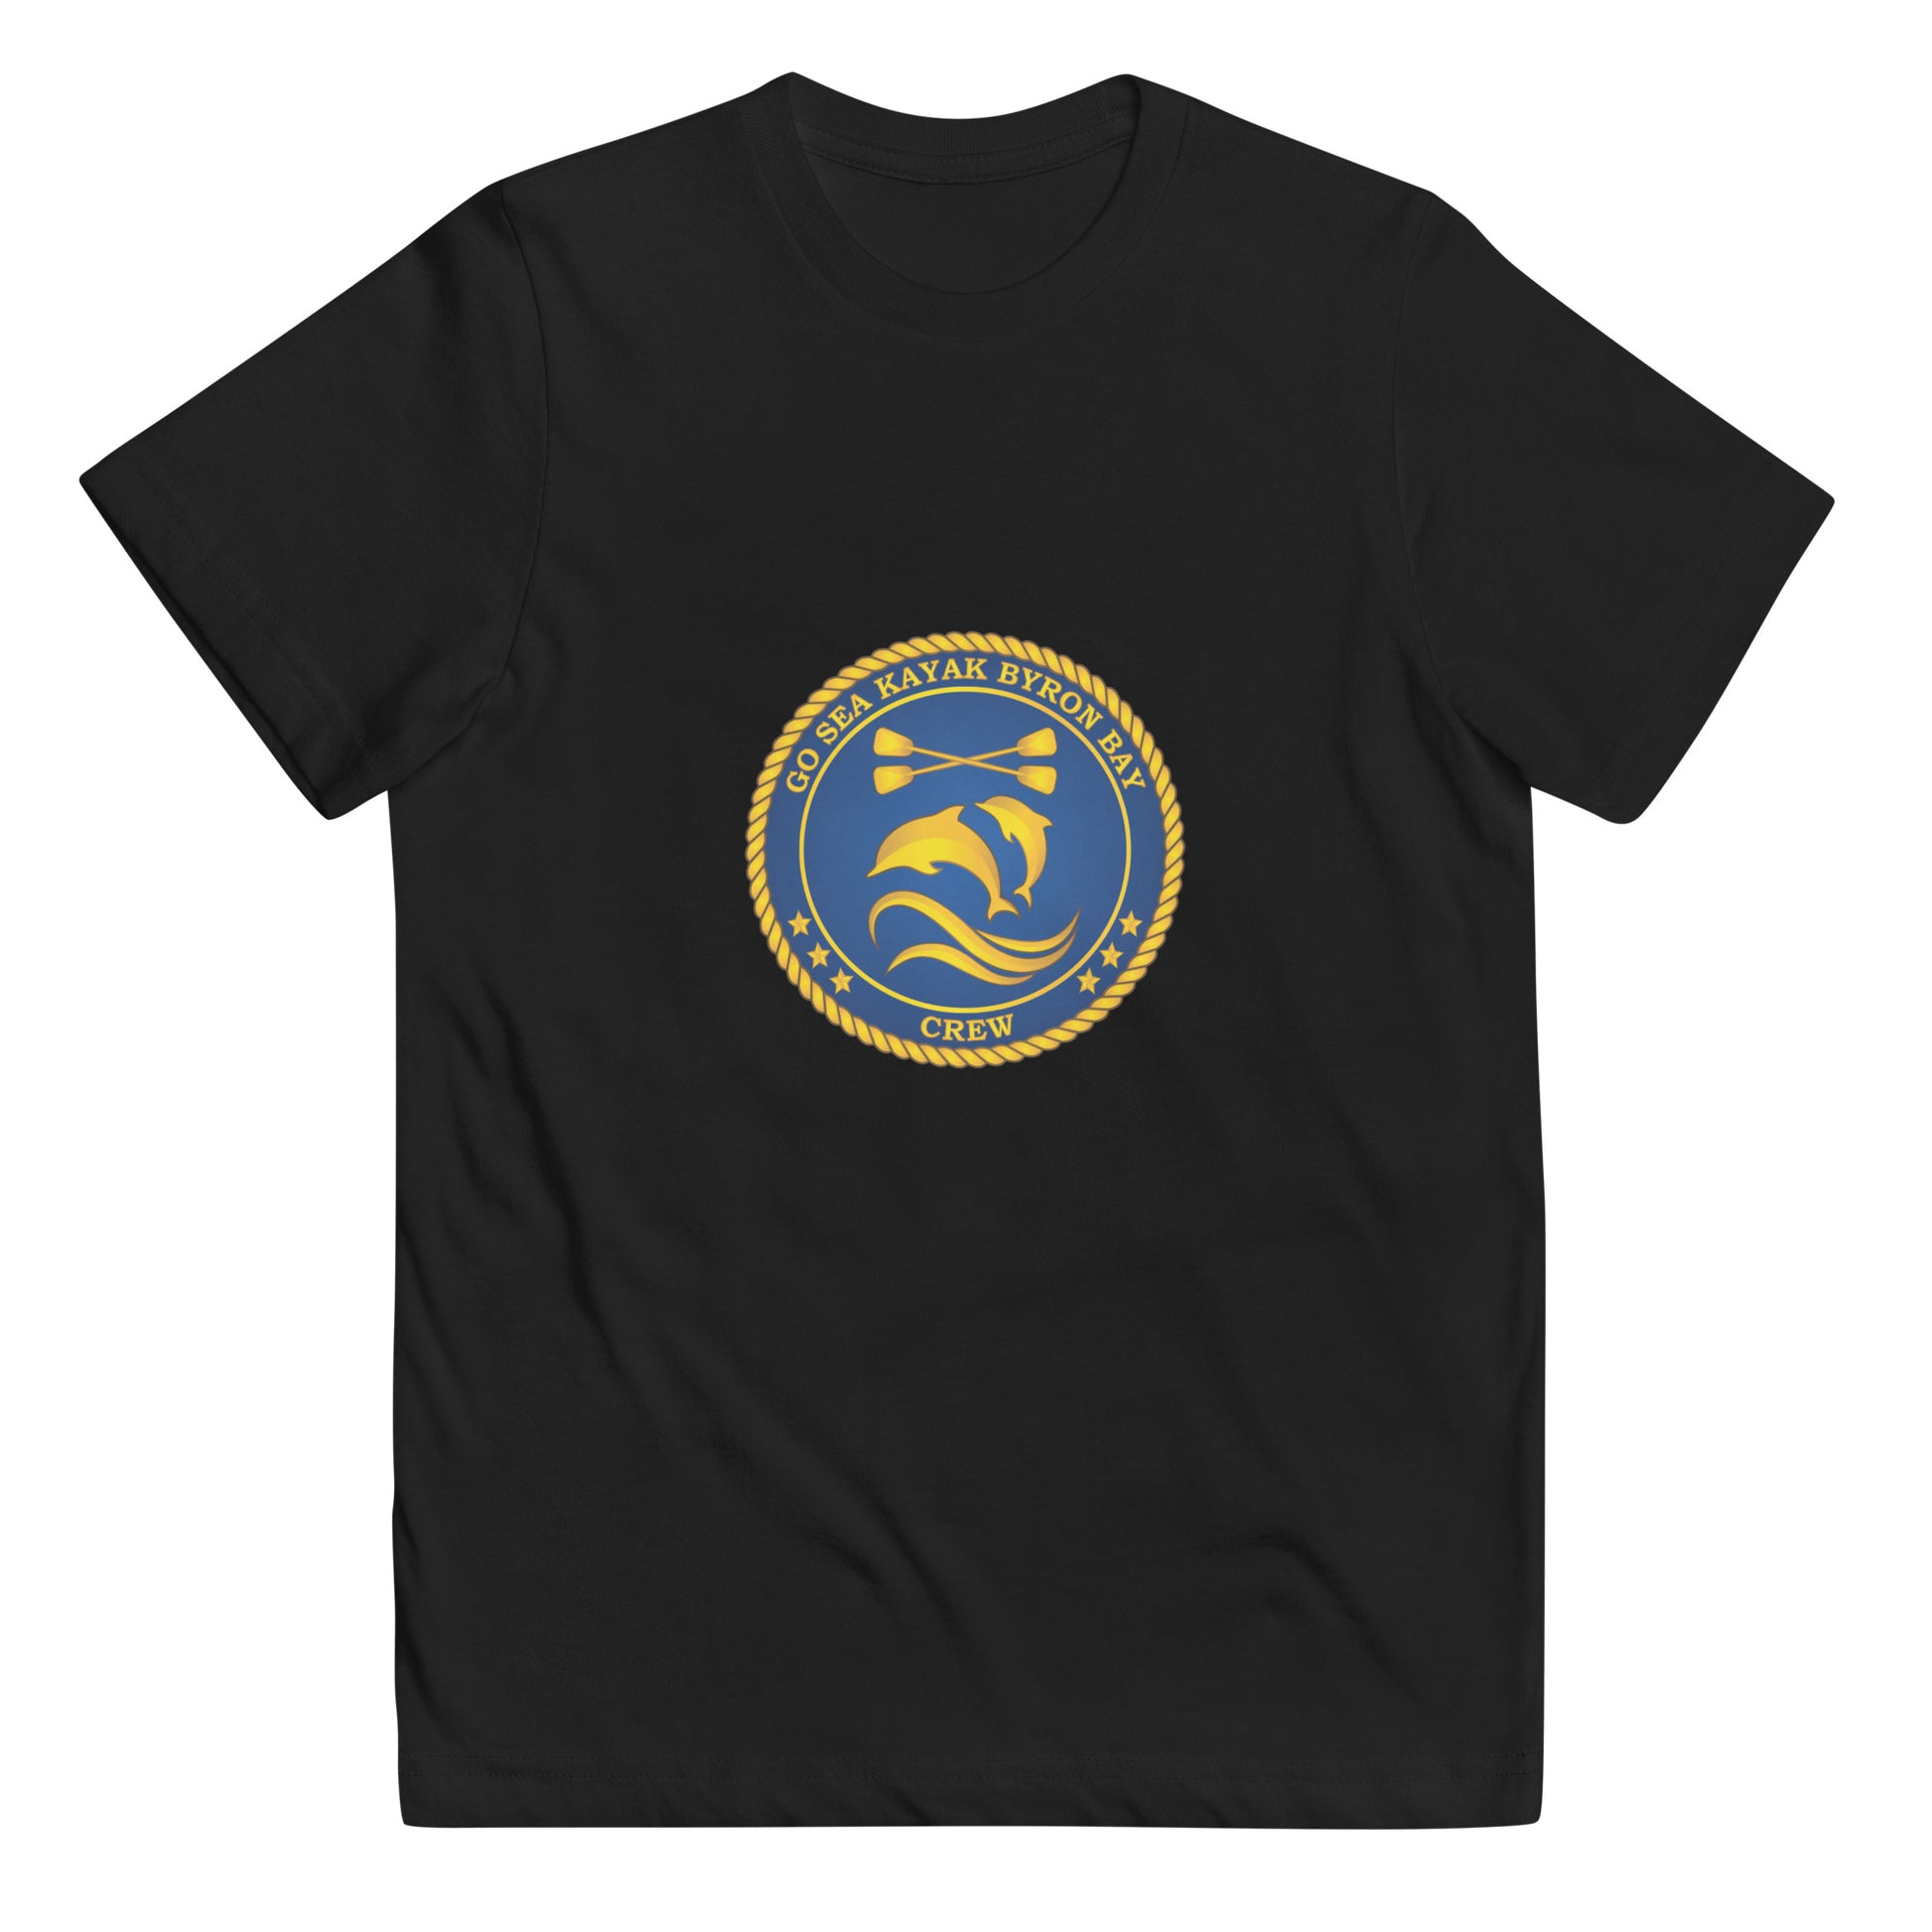  Kids T-Shirt - Black  - Front flat lay view - Go Sea Kayak Byron Bay Crew (issue 2018-2019) logo on front - Genuine Byron Bay Merchandise | Produced by Go Sea Kayak Byron Bay 